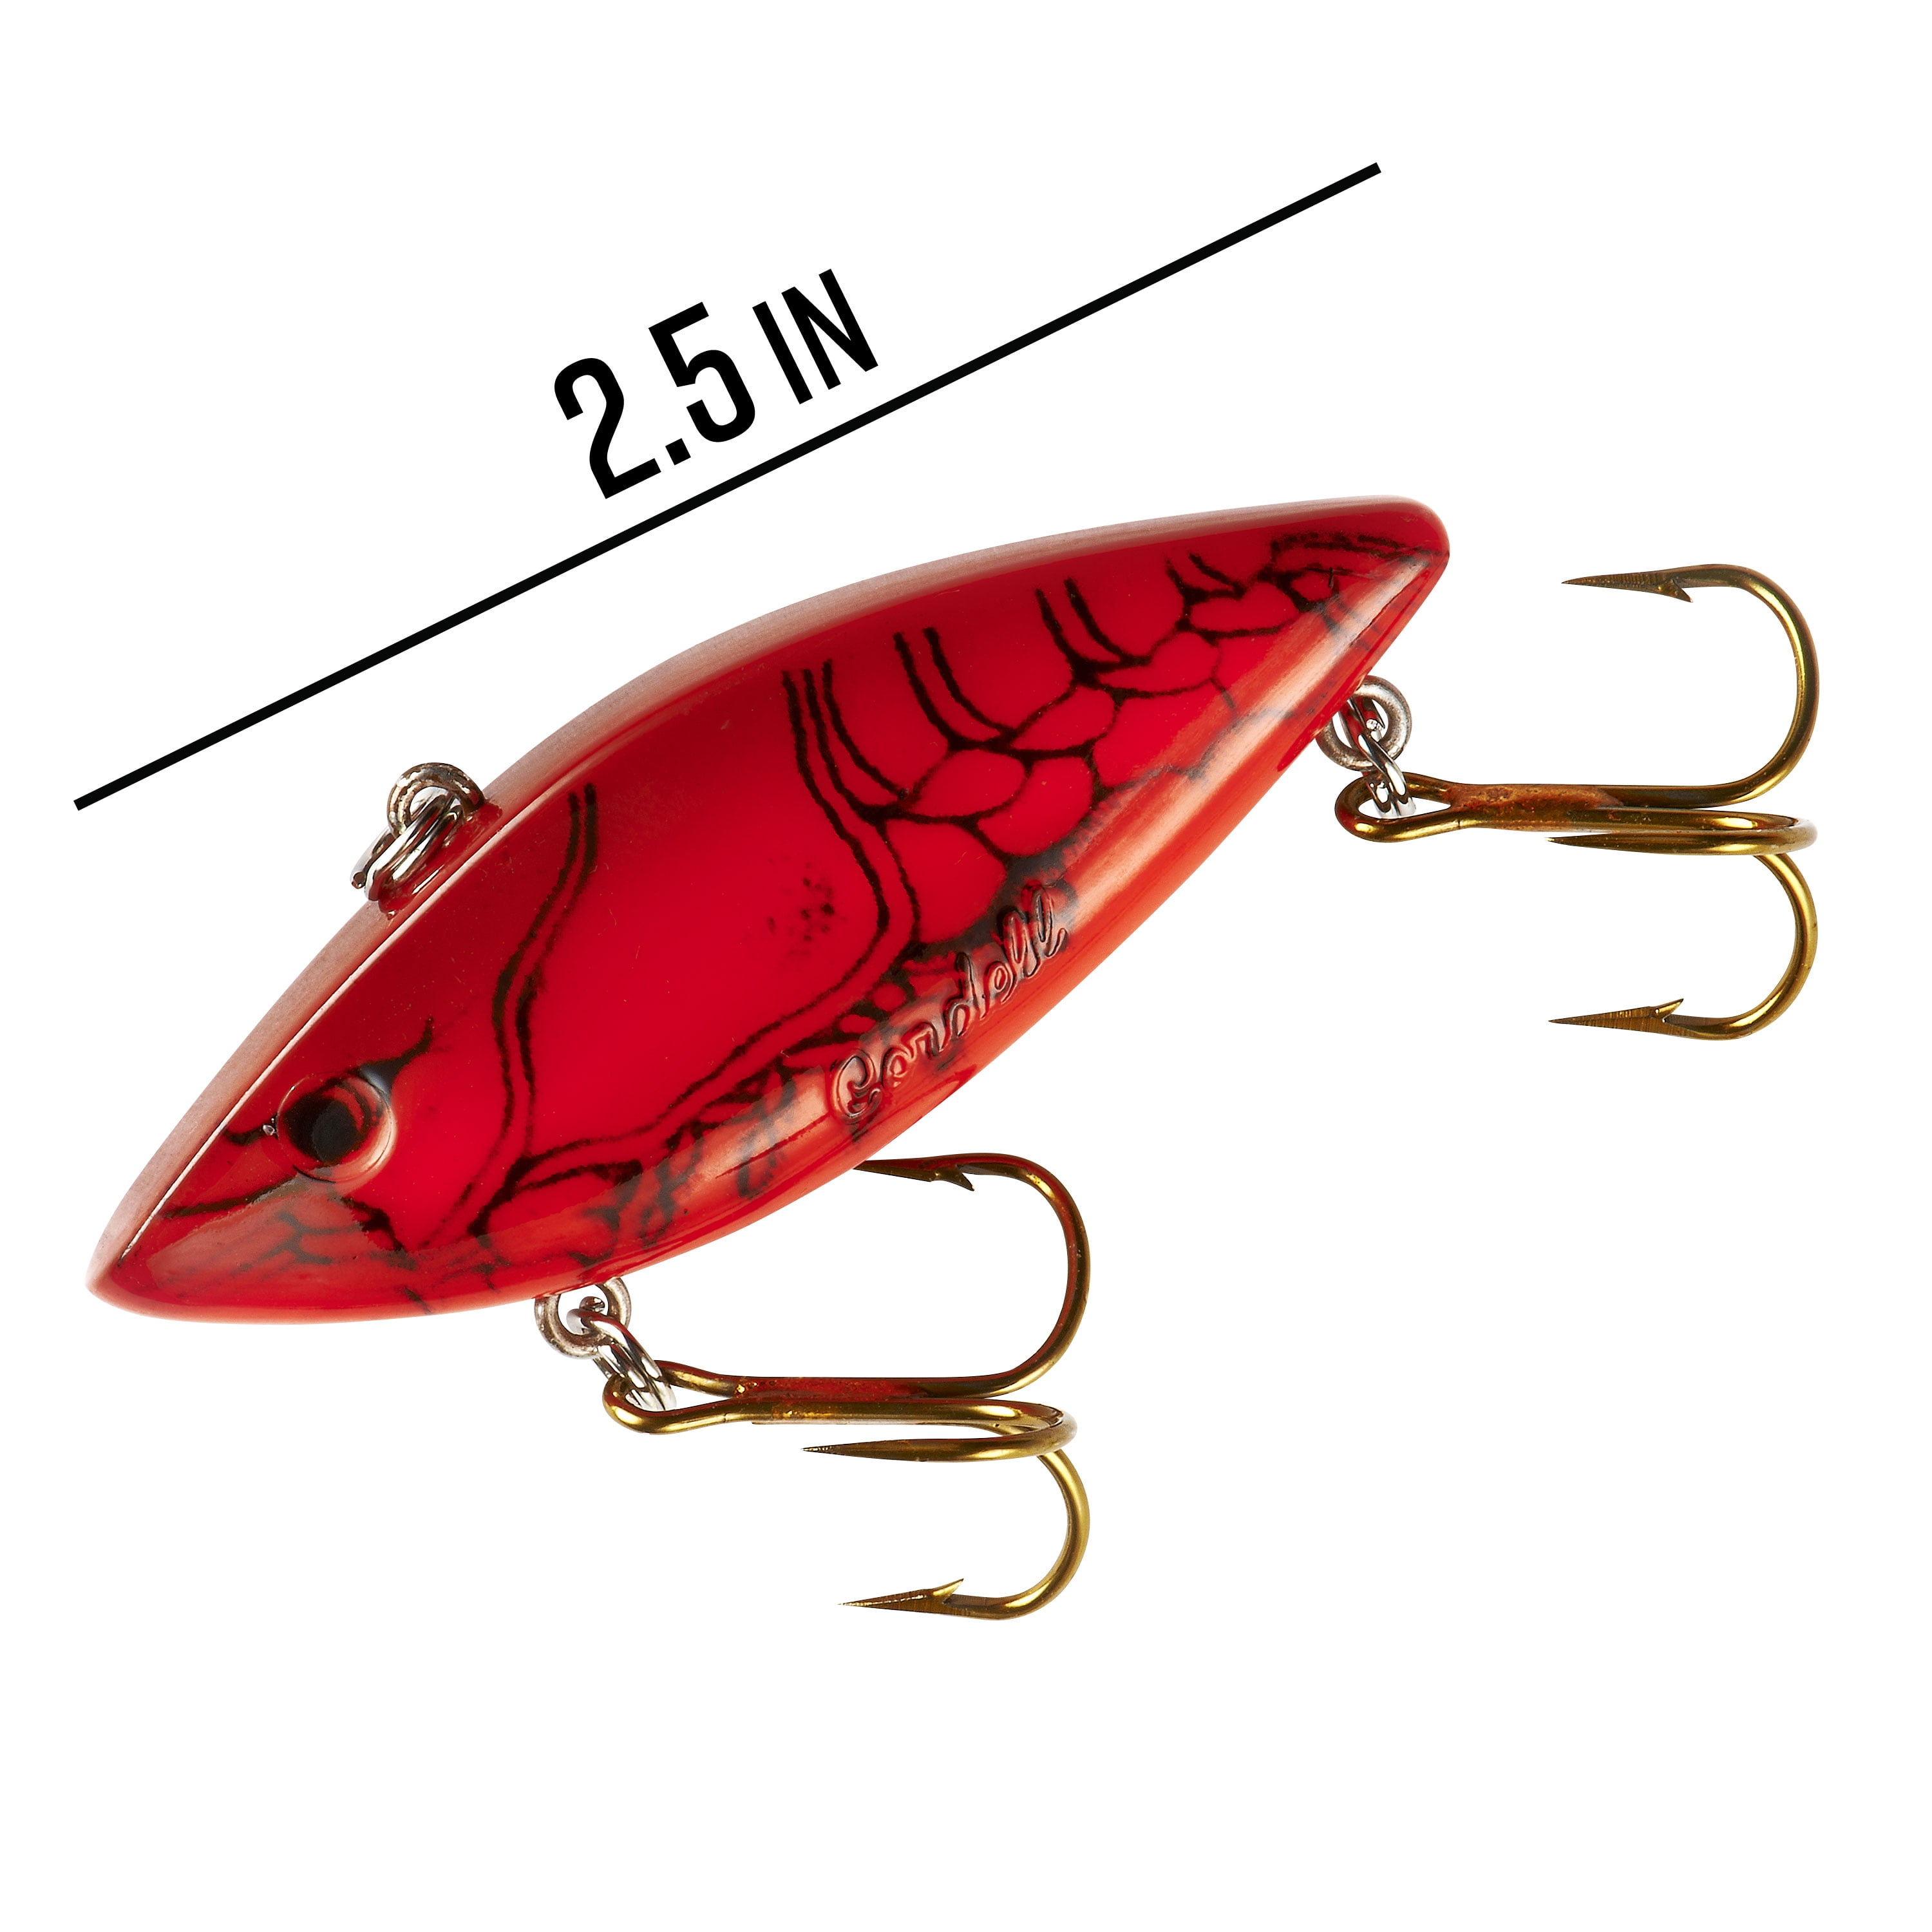 Cotton Cordell Super Spot Rattle Lipless Lure Royal Red 1/2oz